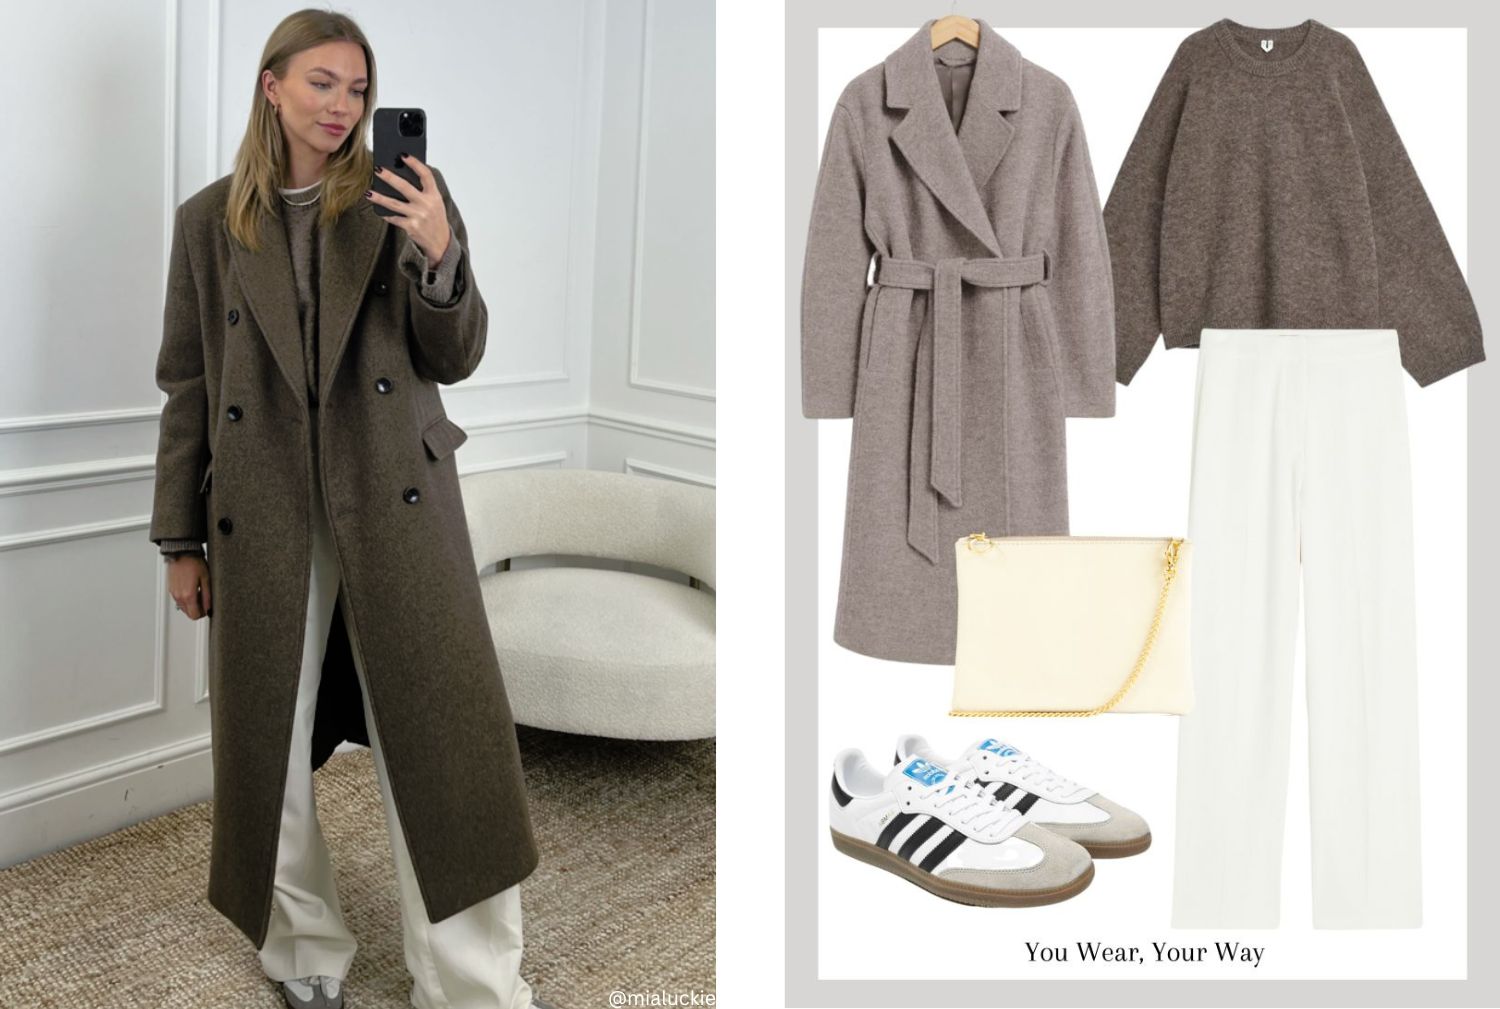 Winter White - Get the Look